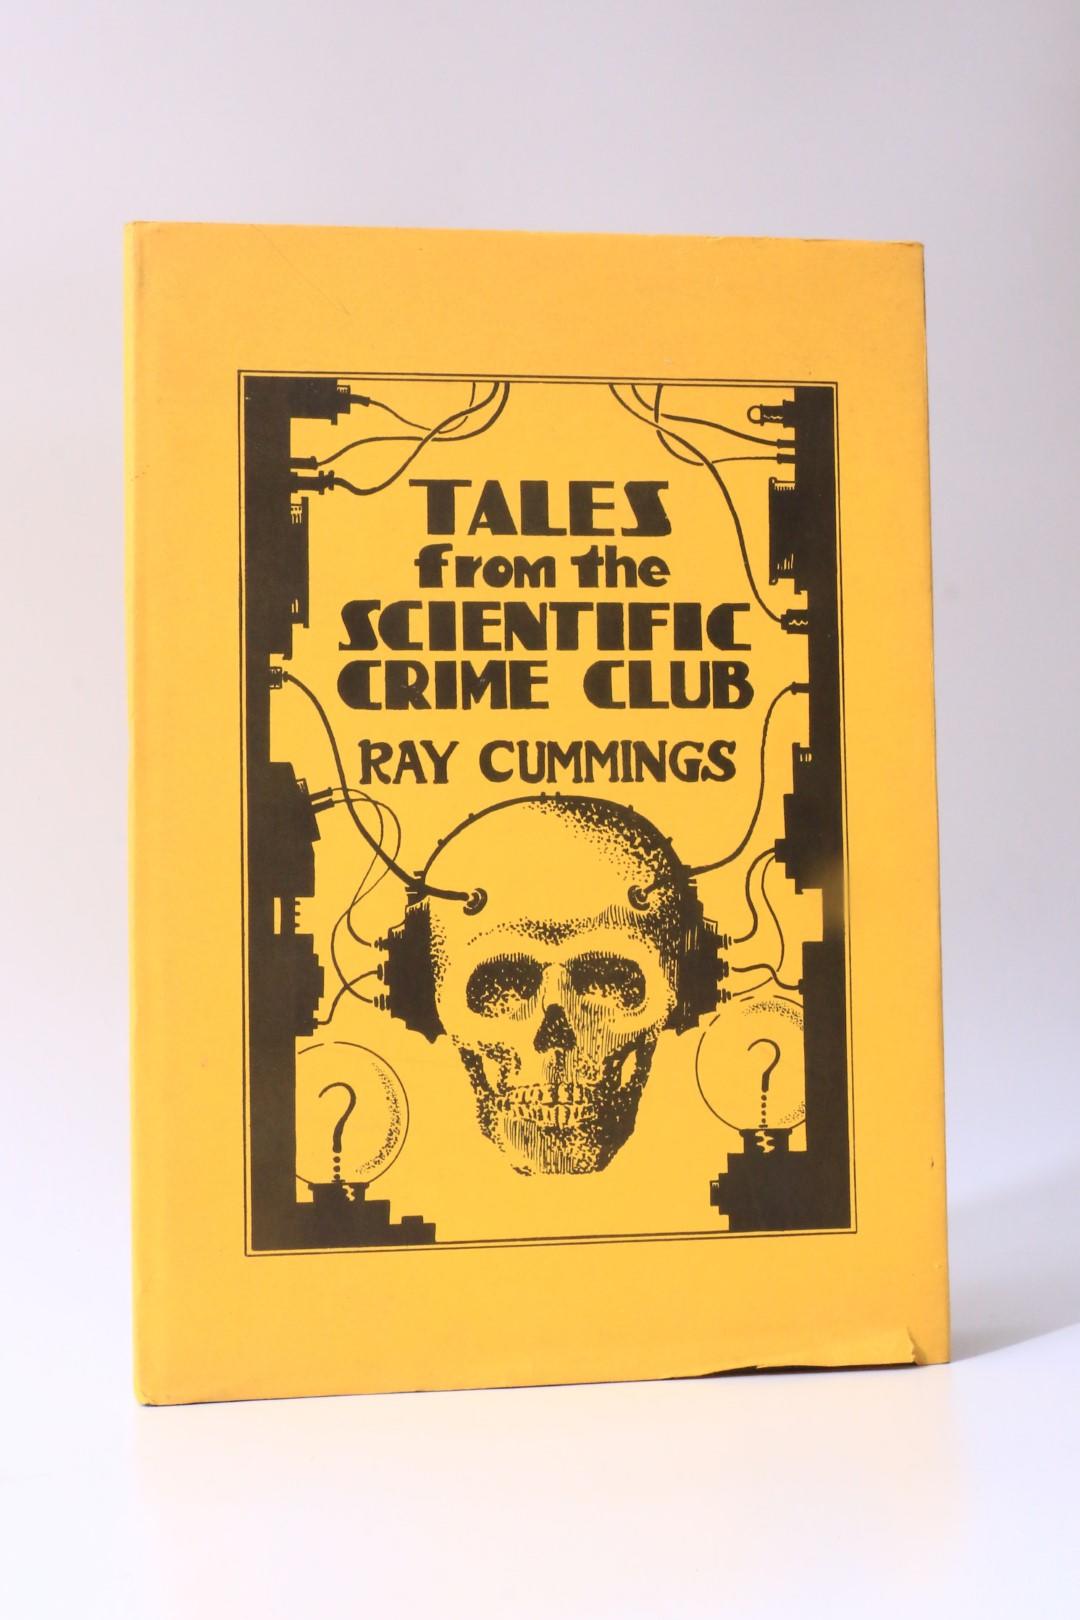 Ray Cummings - Tales from the Scientific Crime Club - Ferret Fantasy, 1979, Limited Edition.